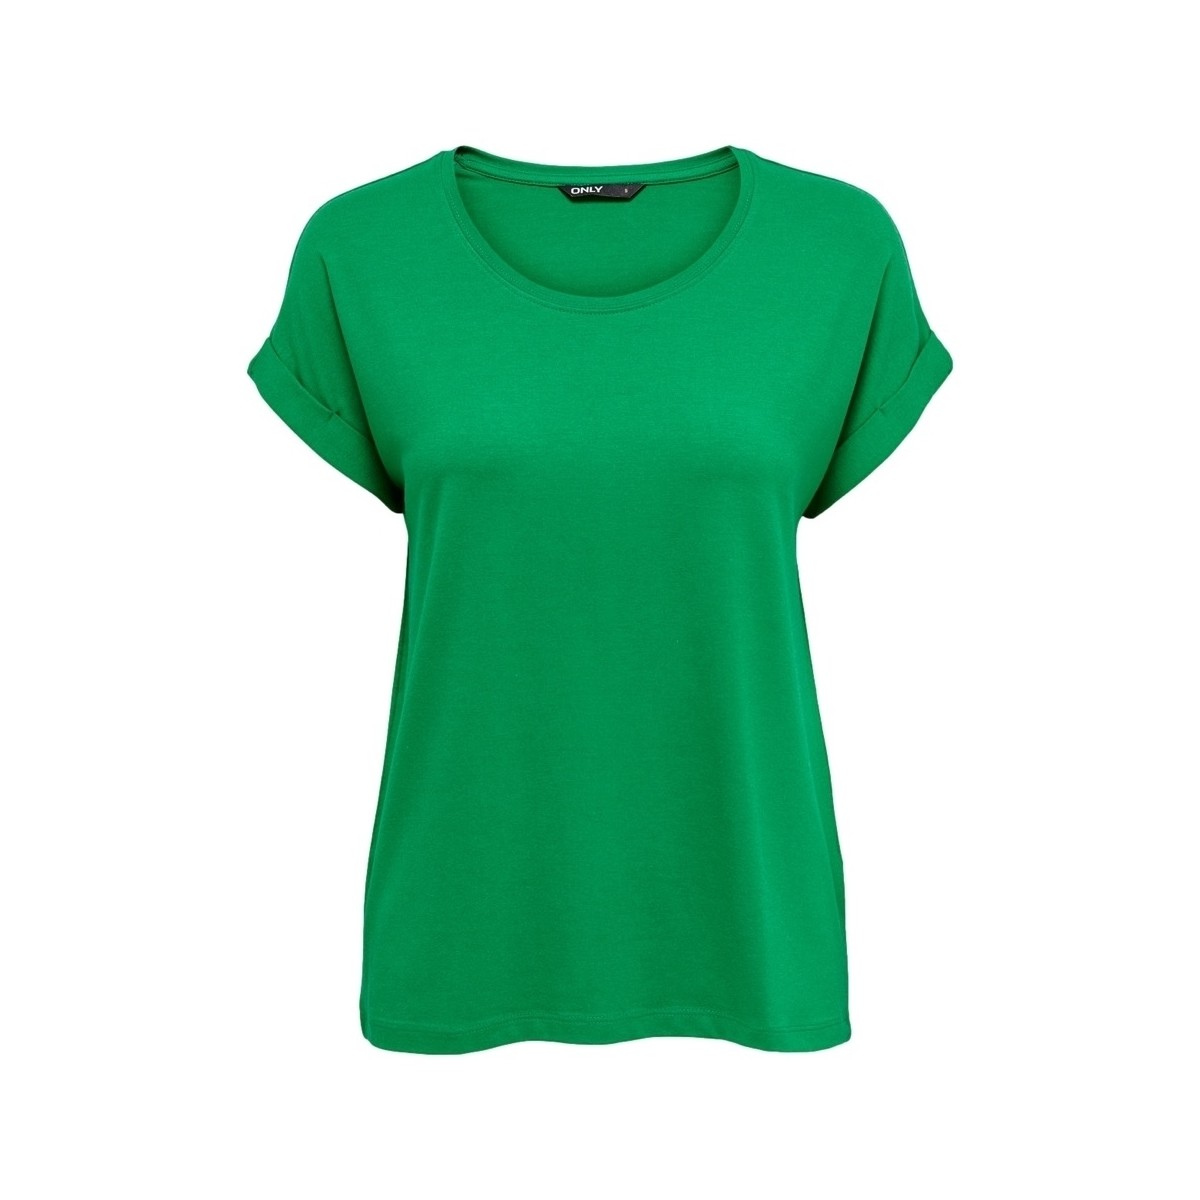 textil Mujer Sudaderas Only Noos Top Moster S/S - Jolly Green Verde